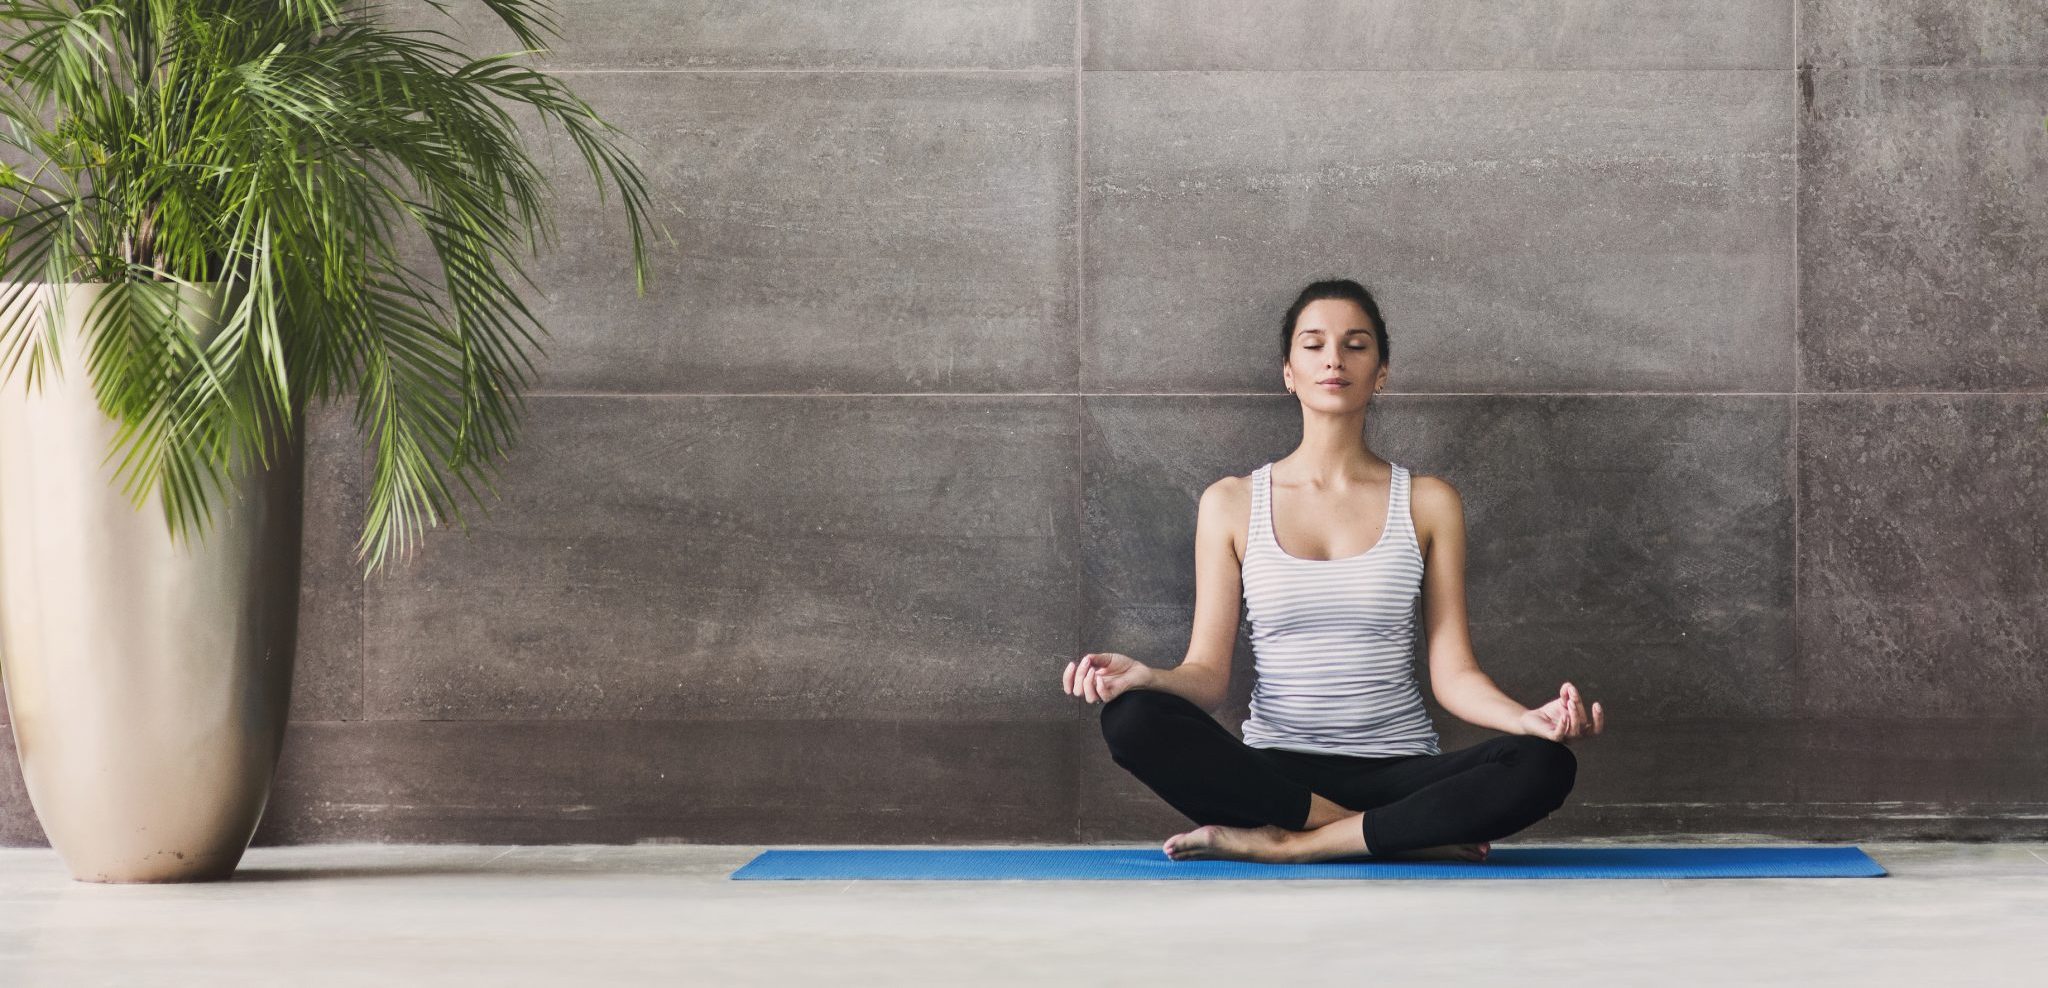 How to Meditate: Step-By-Step Guide